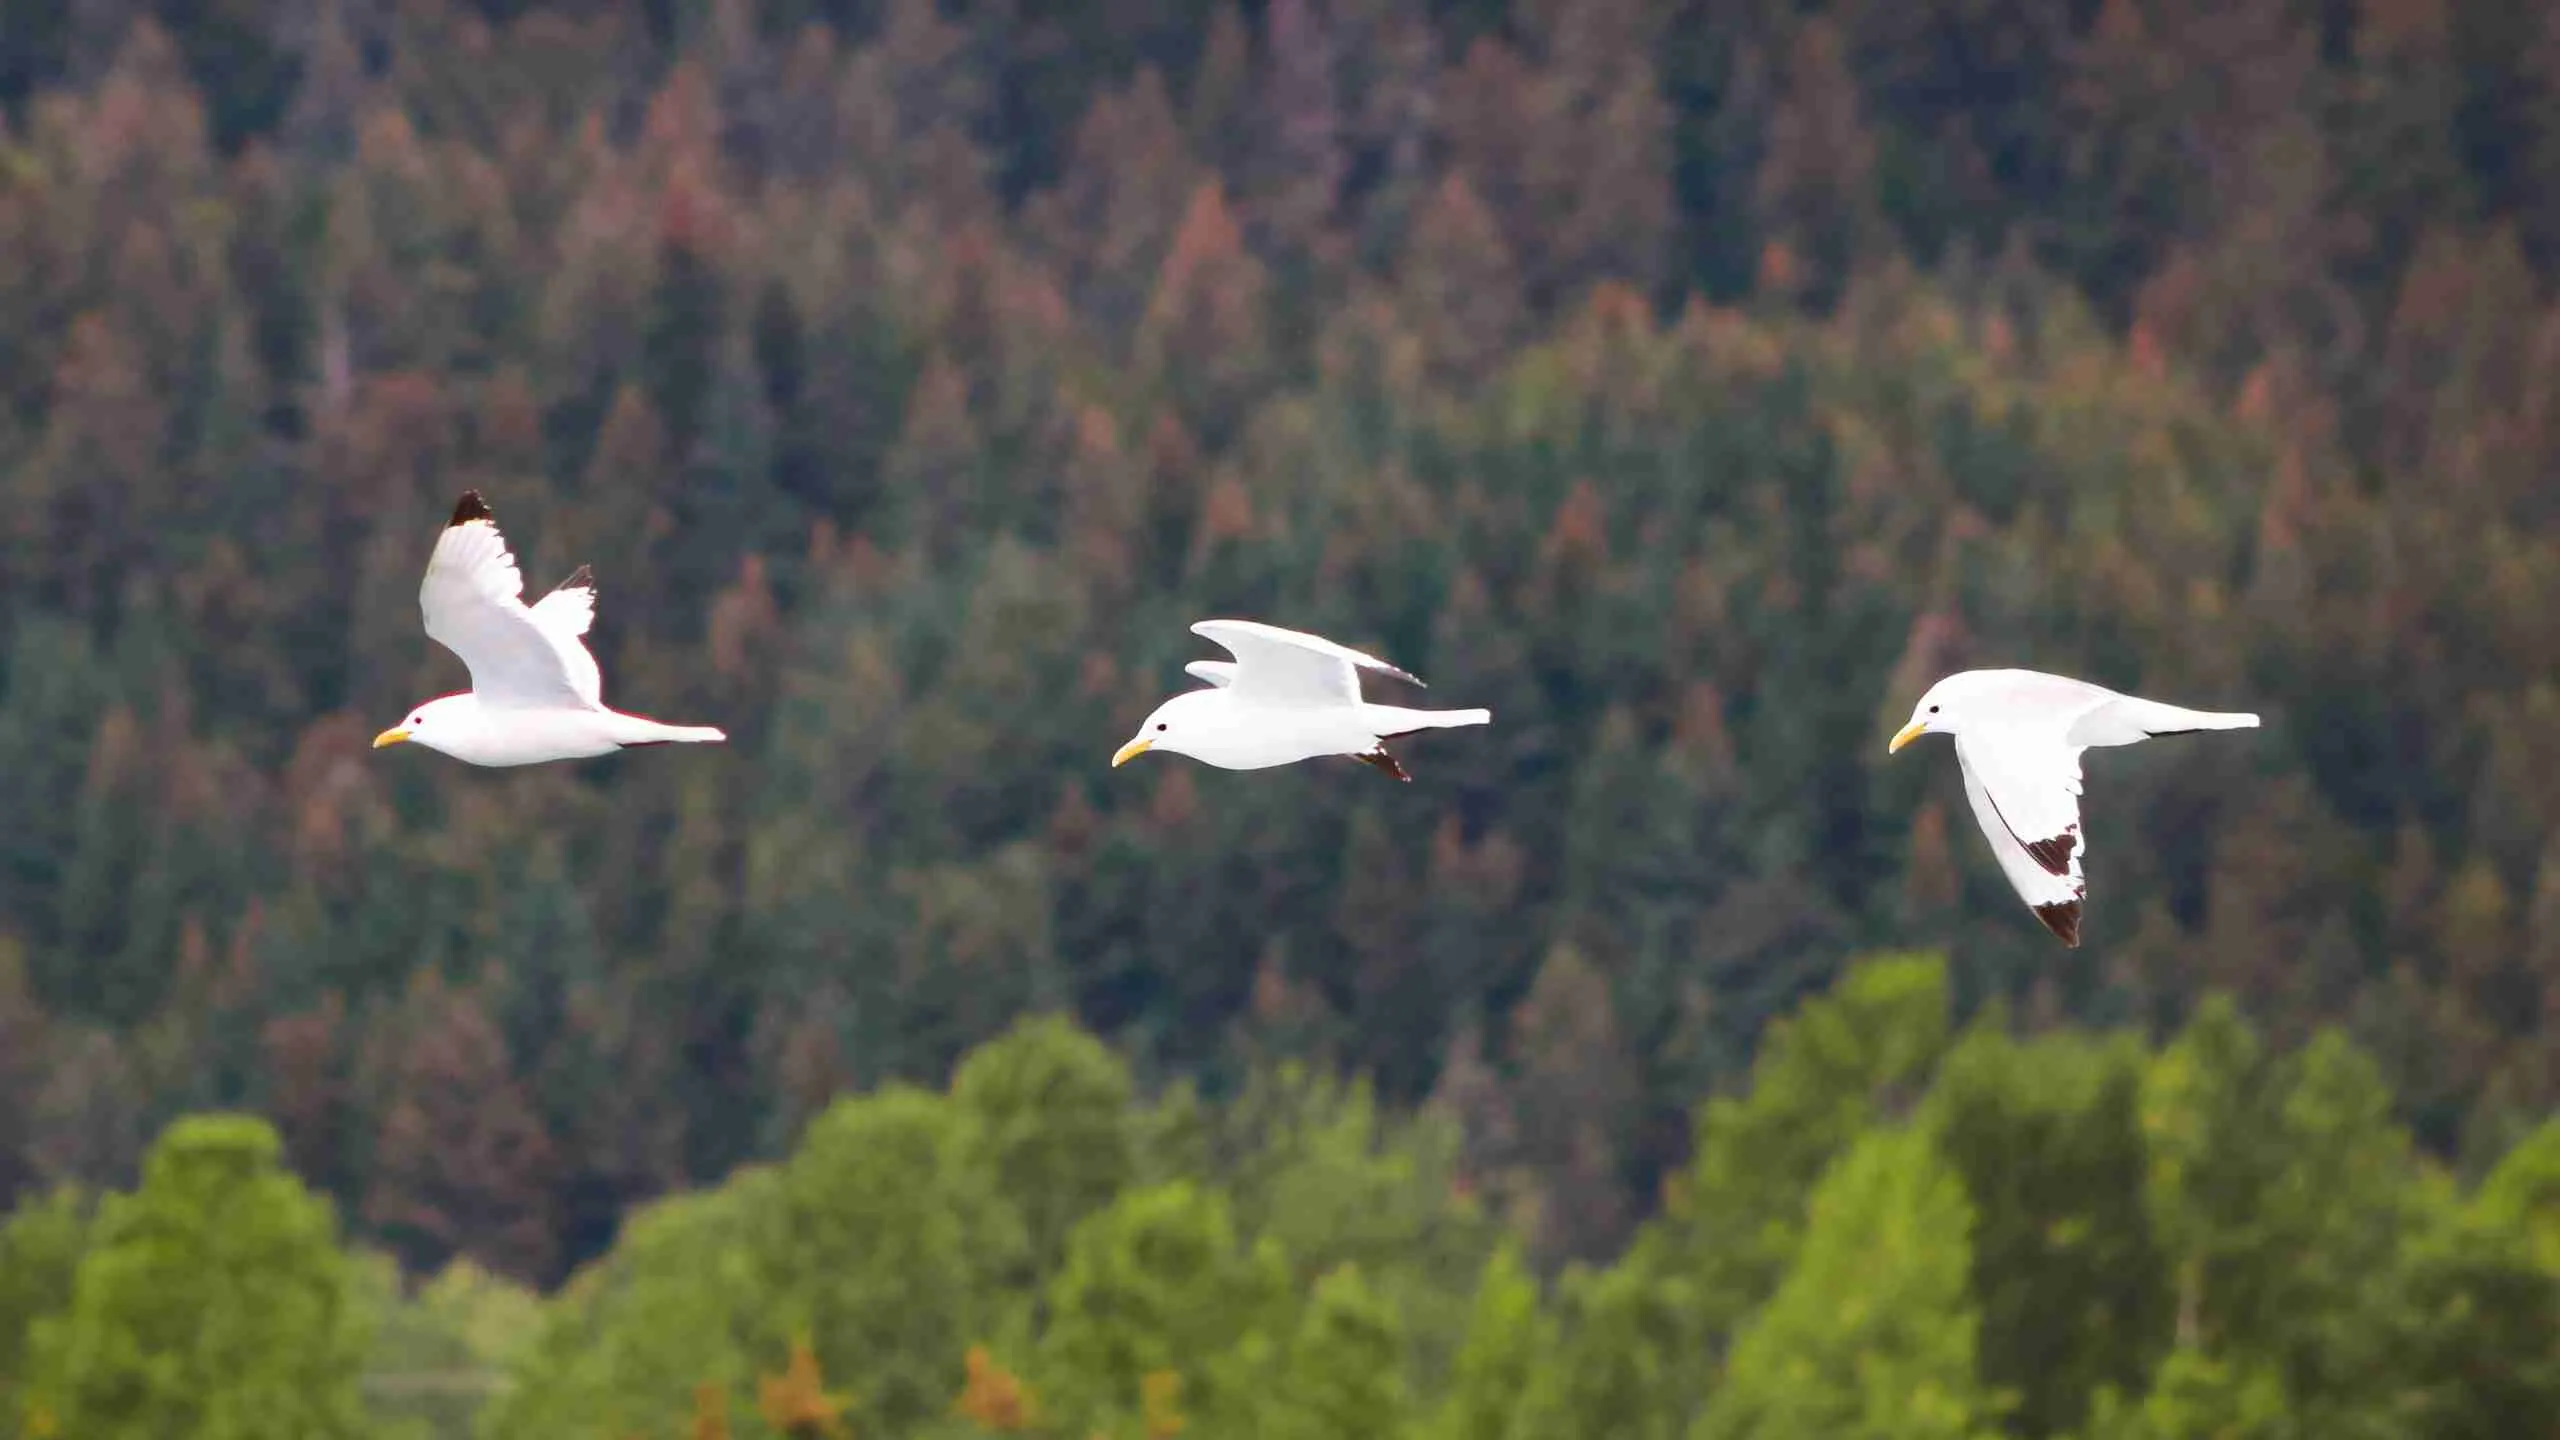 Seagulls flying over a forest in Alaska